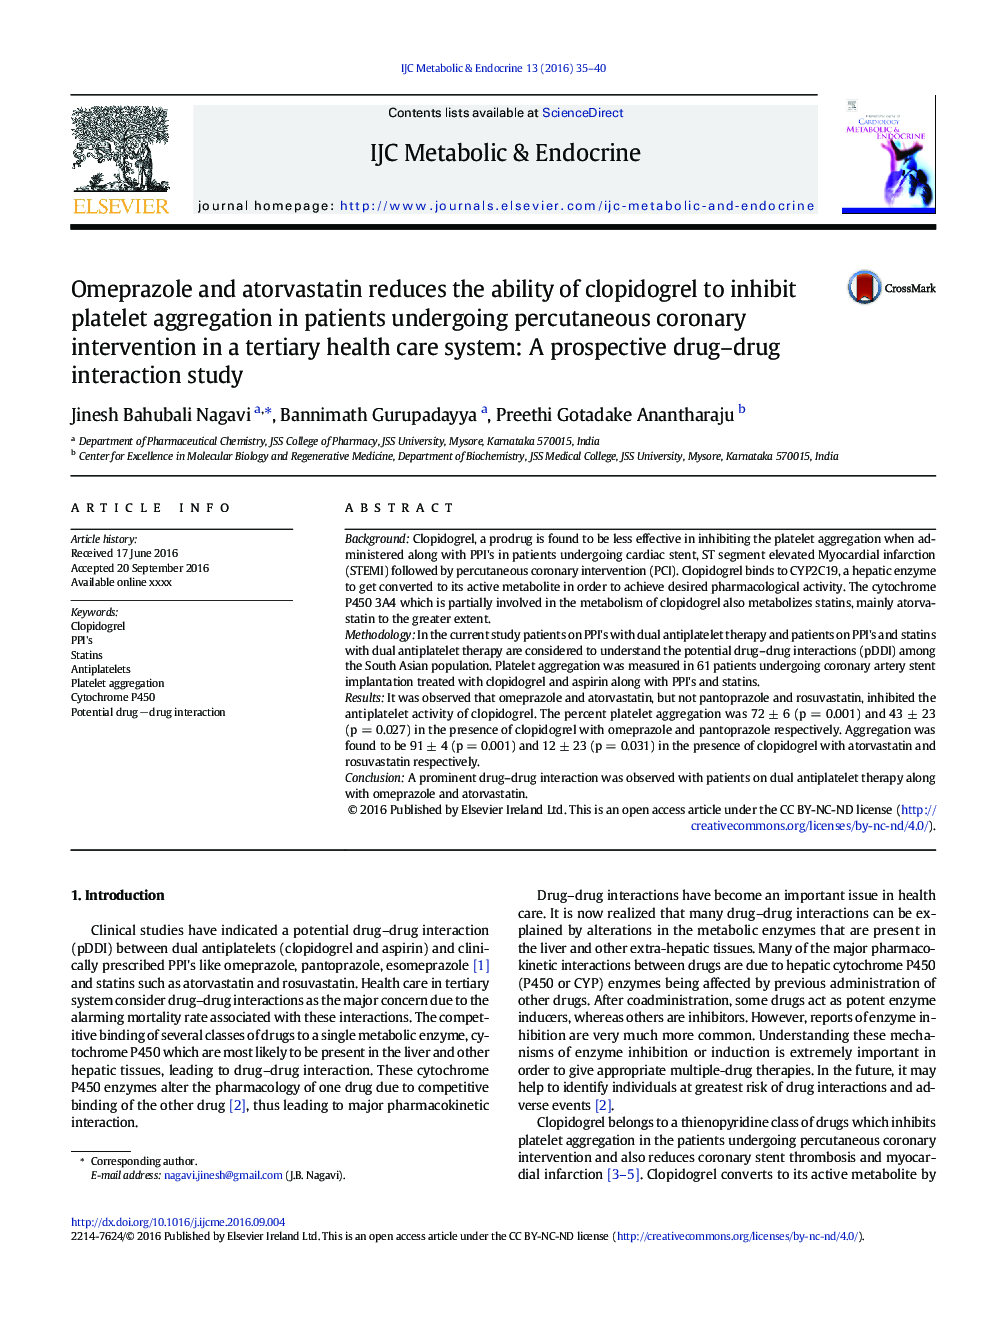 Omeprazole and atorvastatin reduces the ability of clopidogrel to inhibit platelet aggregation in patients undergoing percutaneous coronary intervention in a tertiary health care system: A prospective drug-drug interaction study